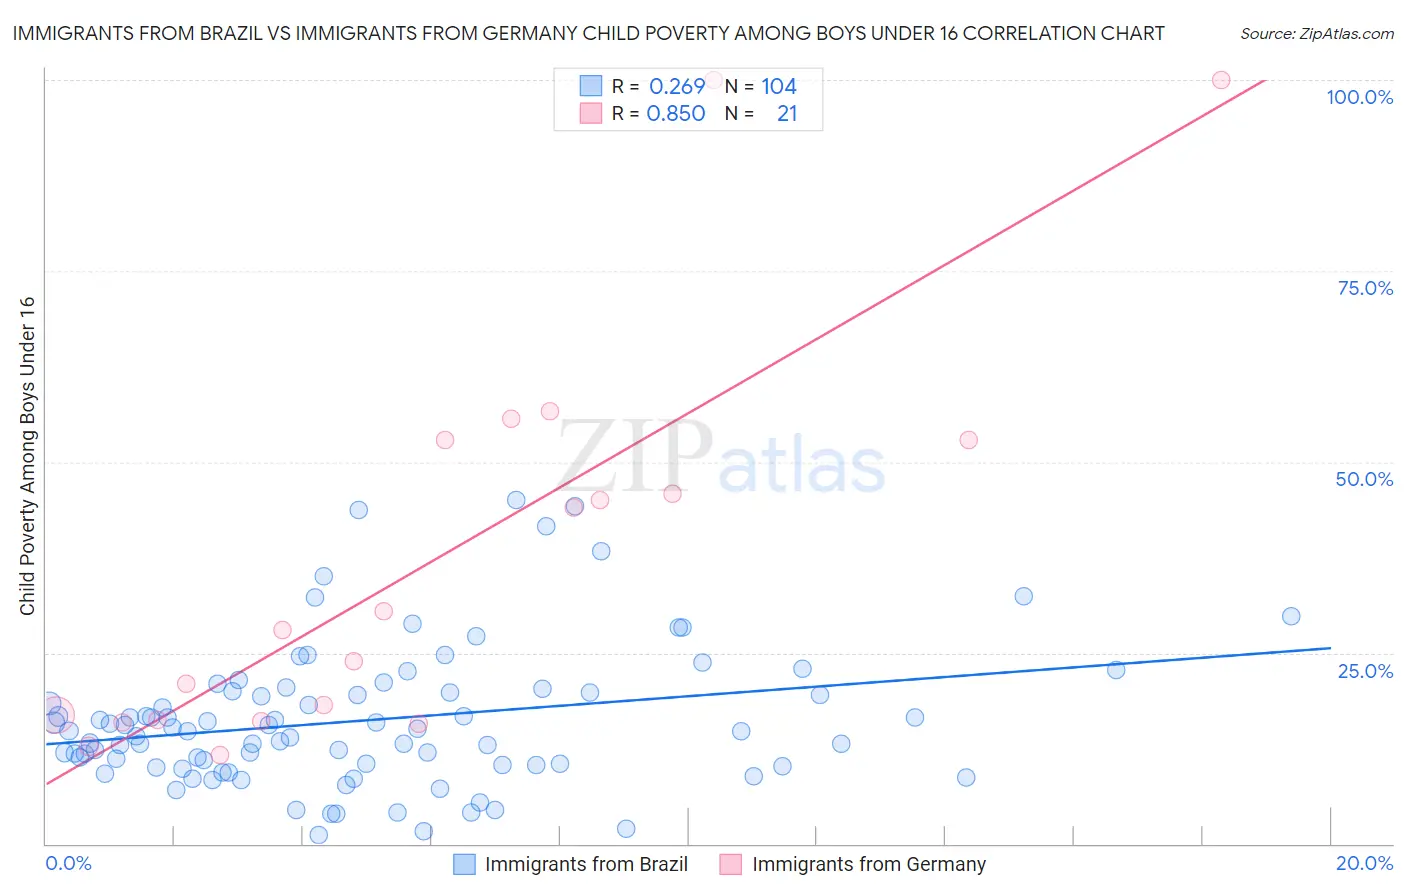 Immigrants from Brazil vs Immigrants from Germany Child Poverty Among Boys Under 16